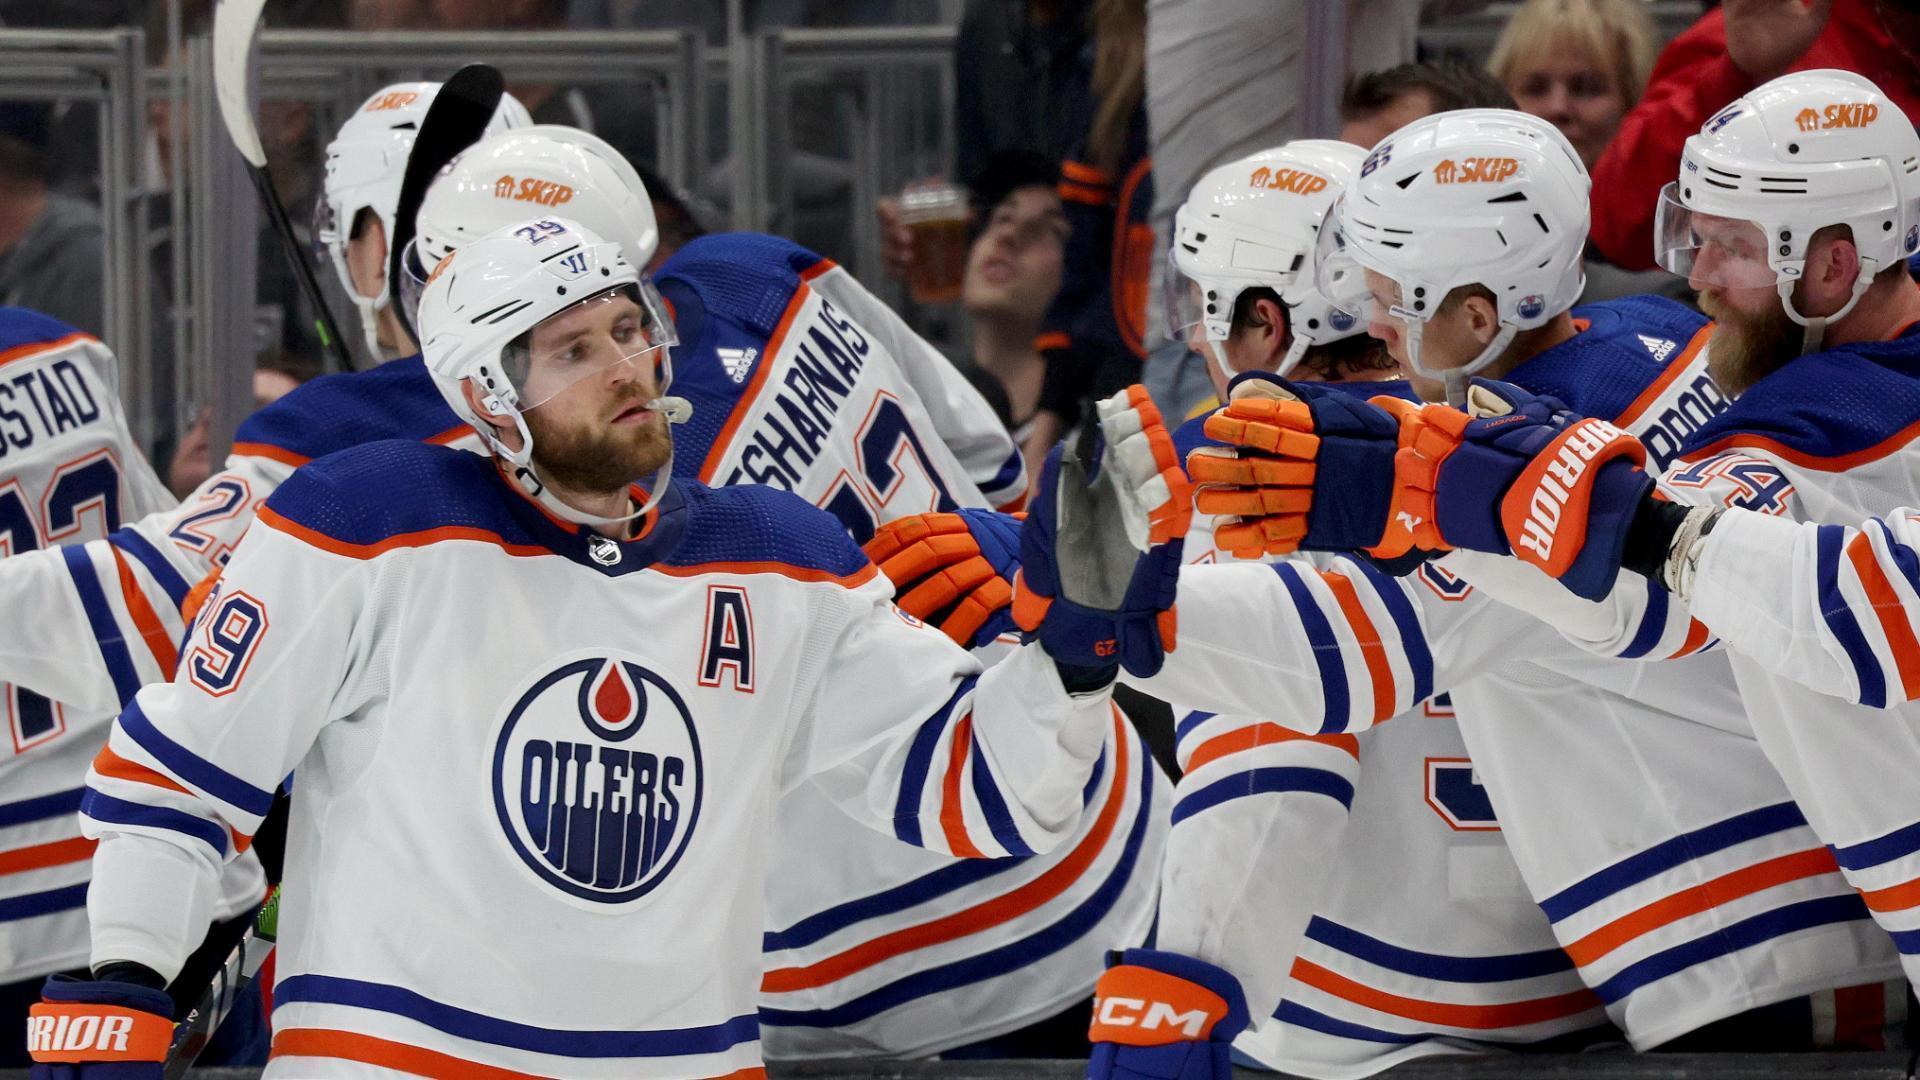 Leon Draisaitl brings Oilers all the way back from 3-0 deficit - Stream the Video